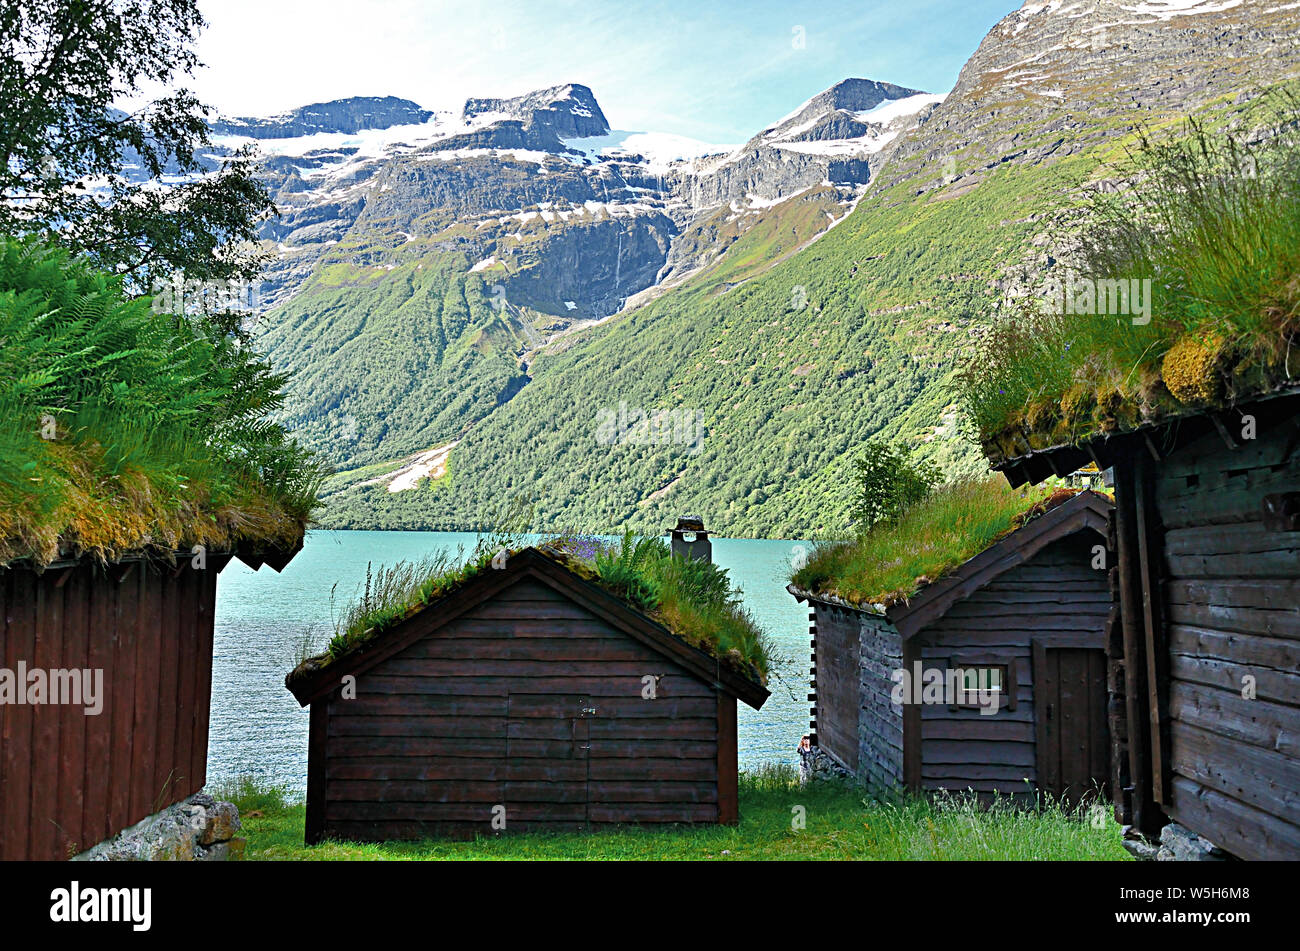 Norwegian Huts with Grass on Roofs Stock Photo